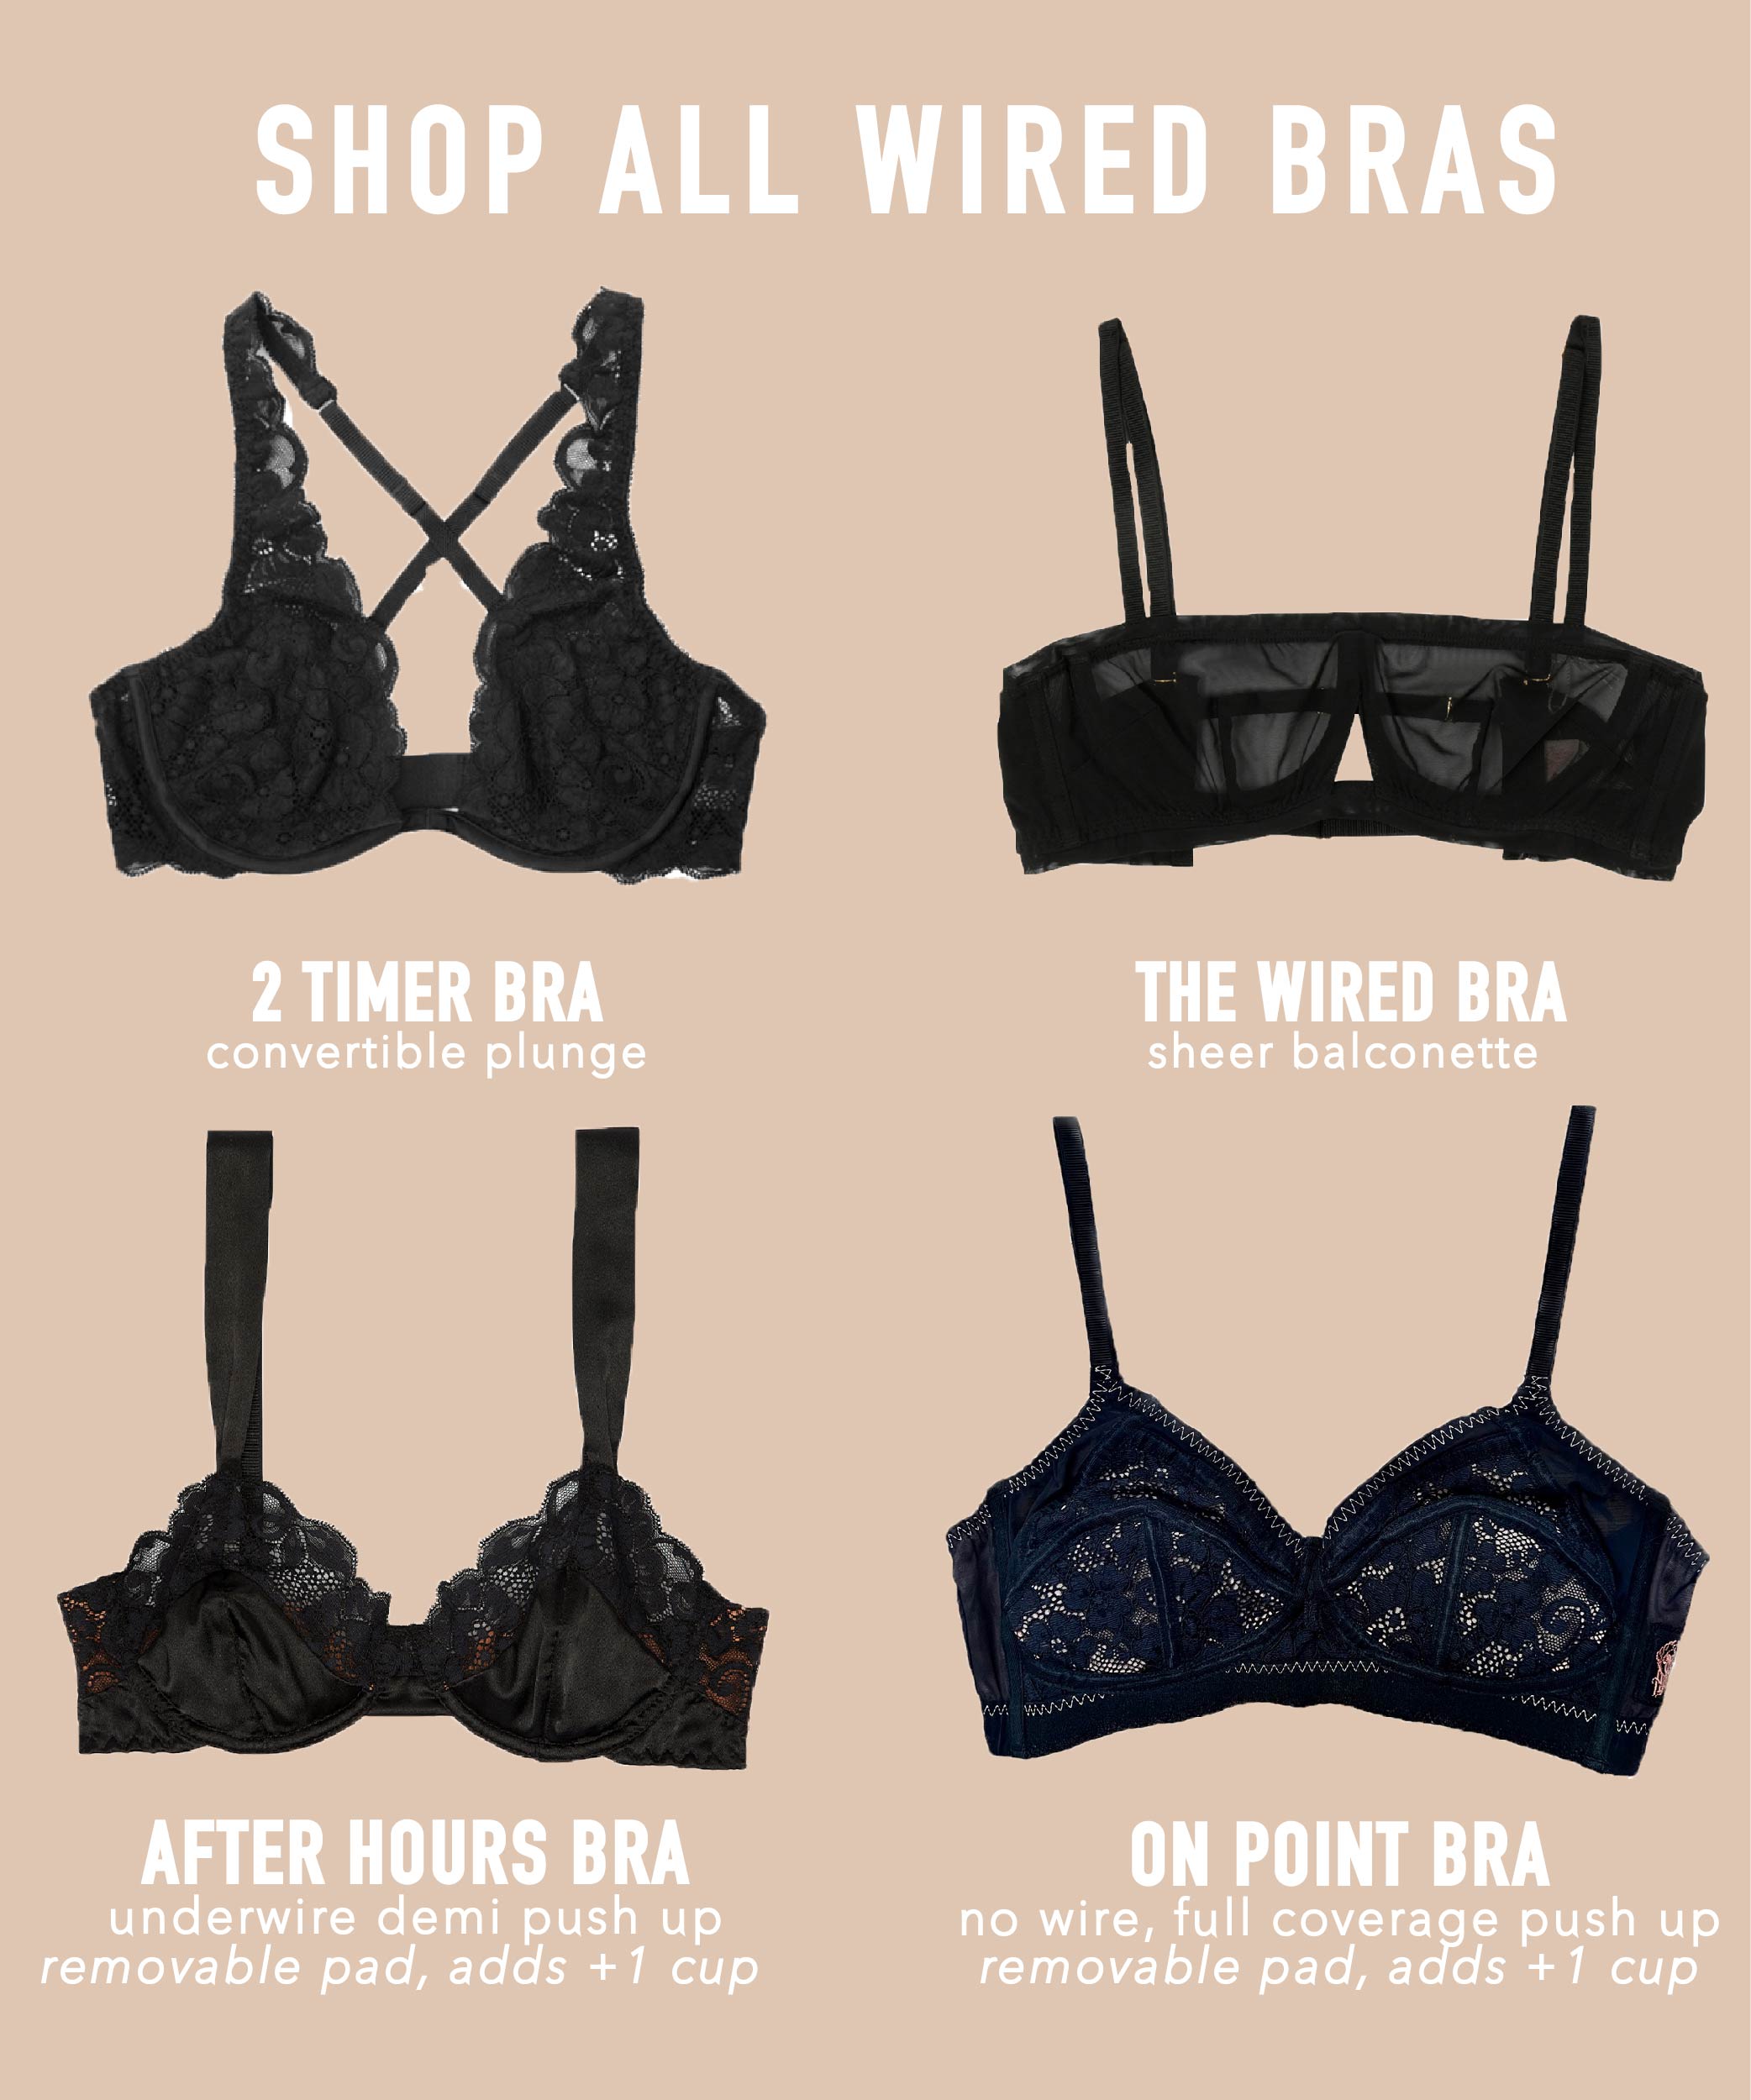 Wired Bras – We Are HAH